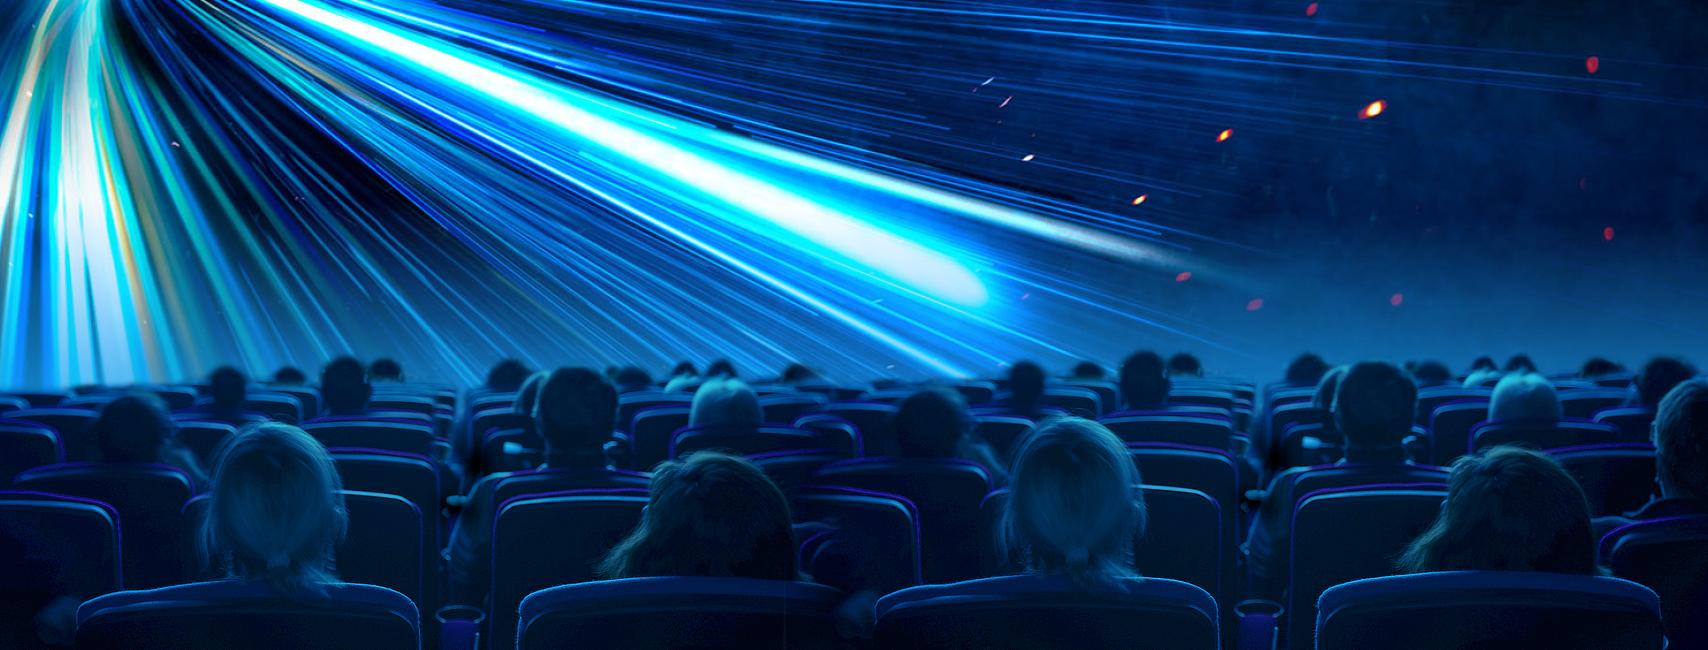 Get Cinema Tickets from £5 at Odeon